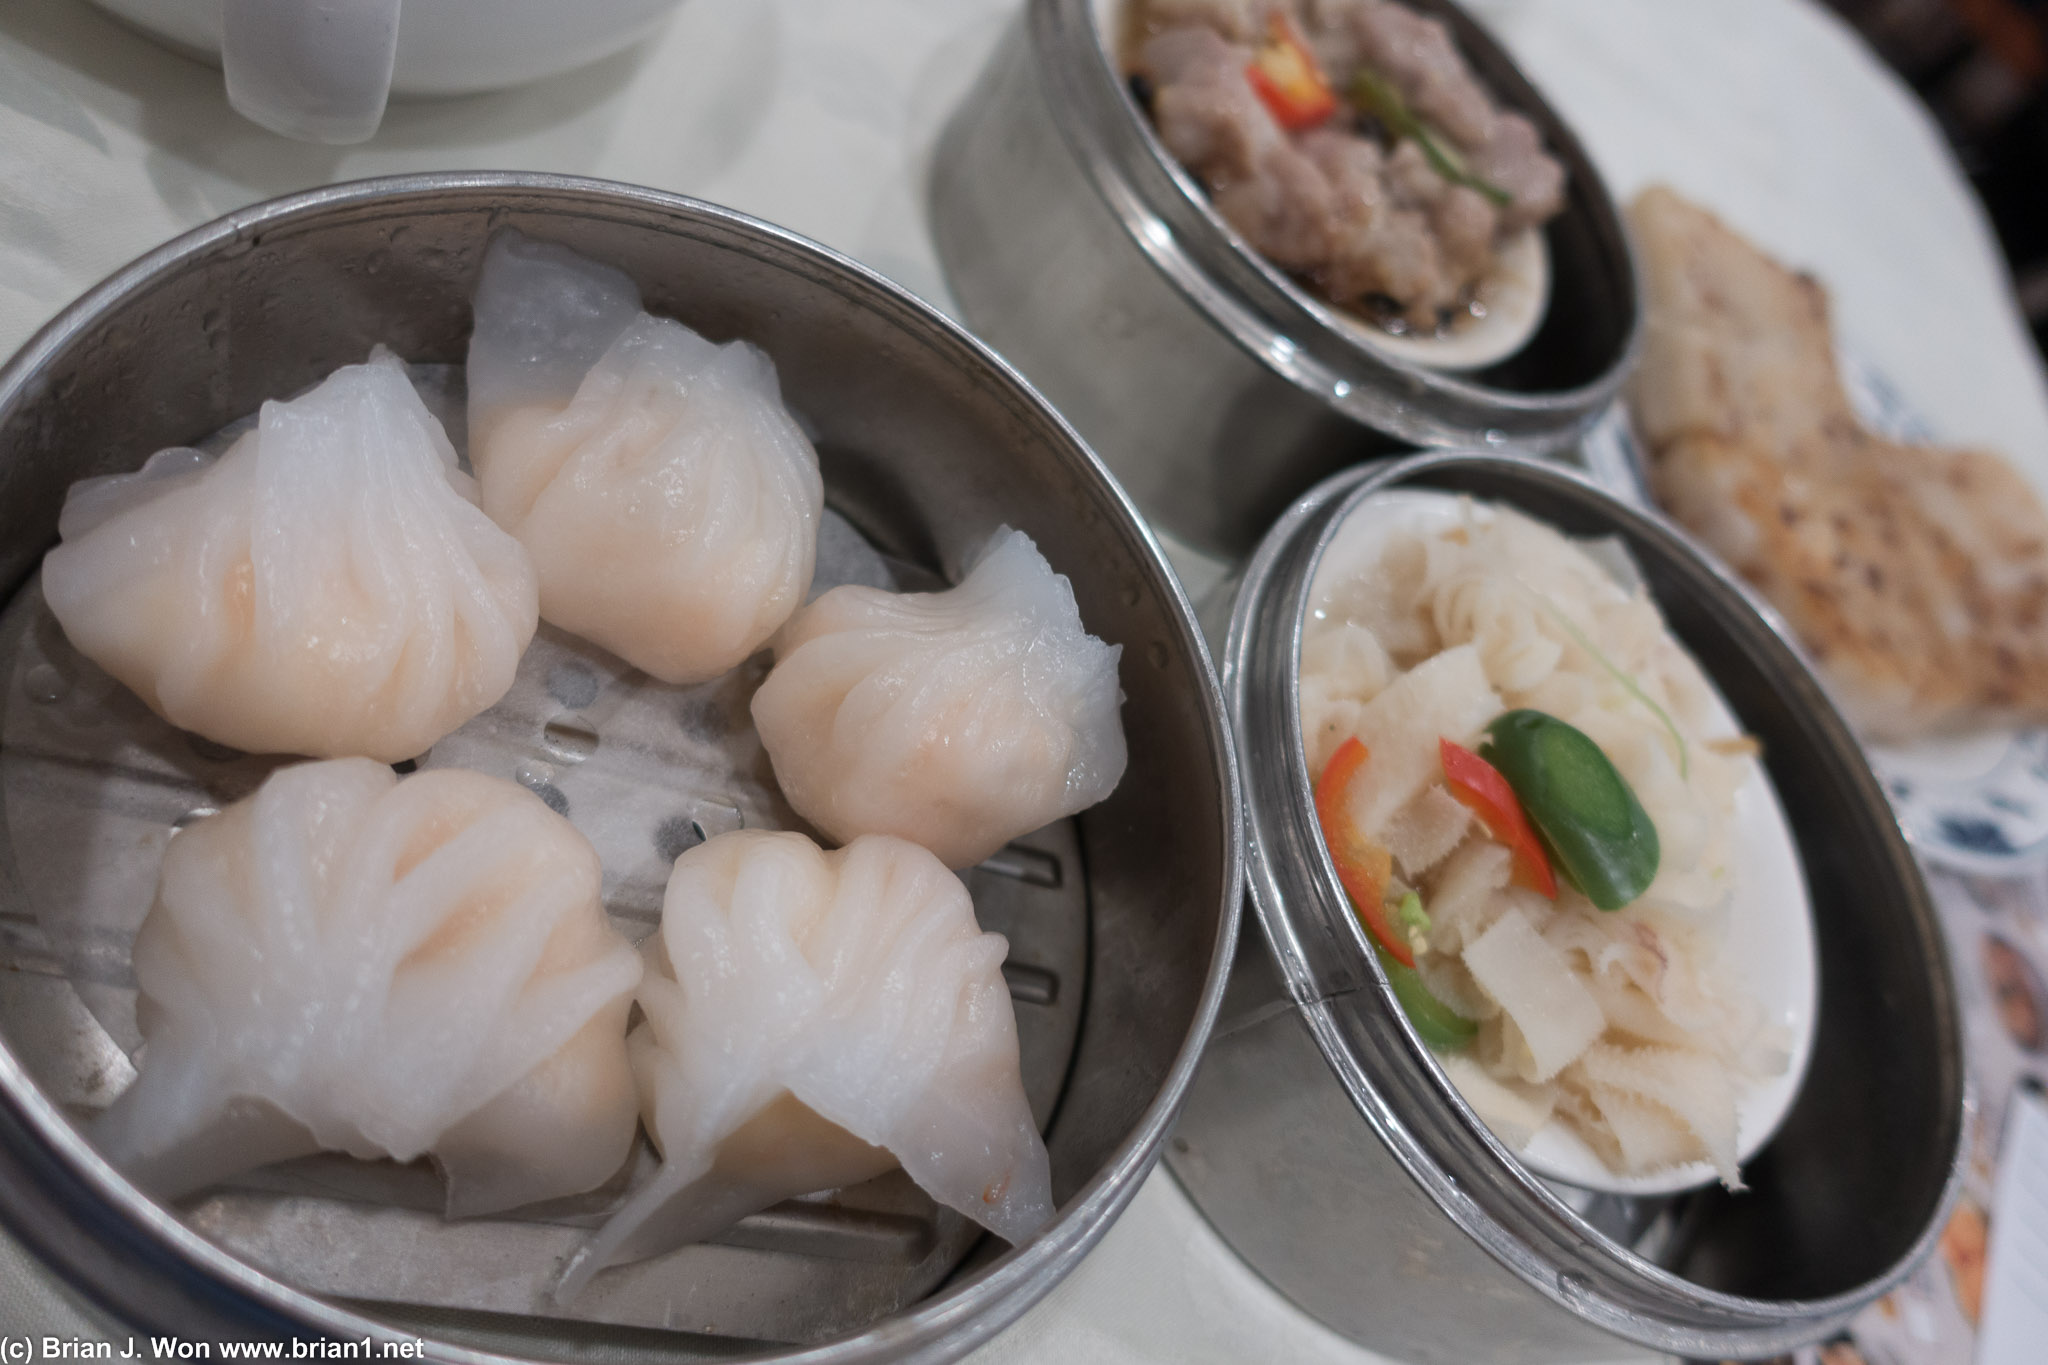 Har gow, beef tripe, pai gut. All not bad, but you could taste the MSG after.